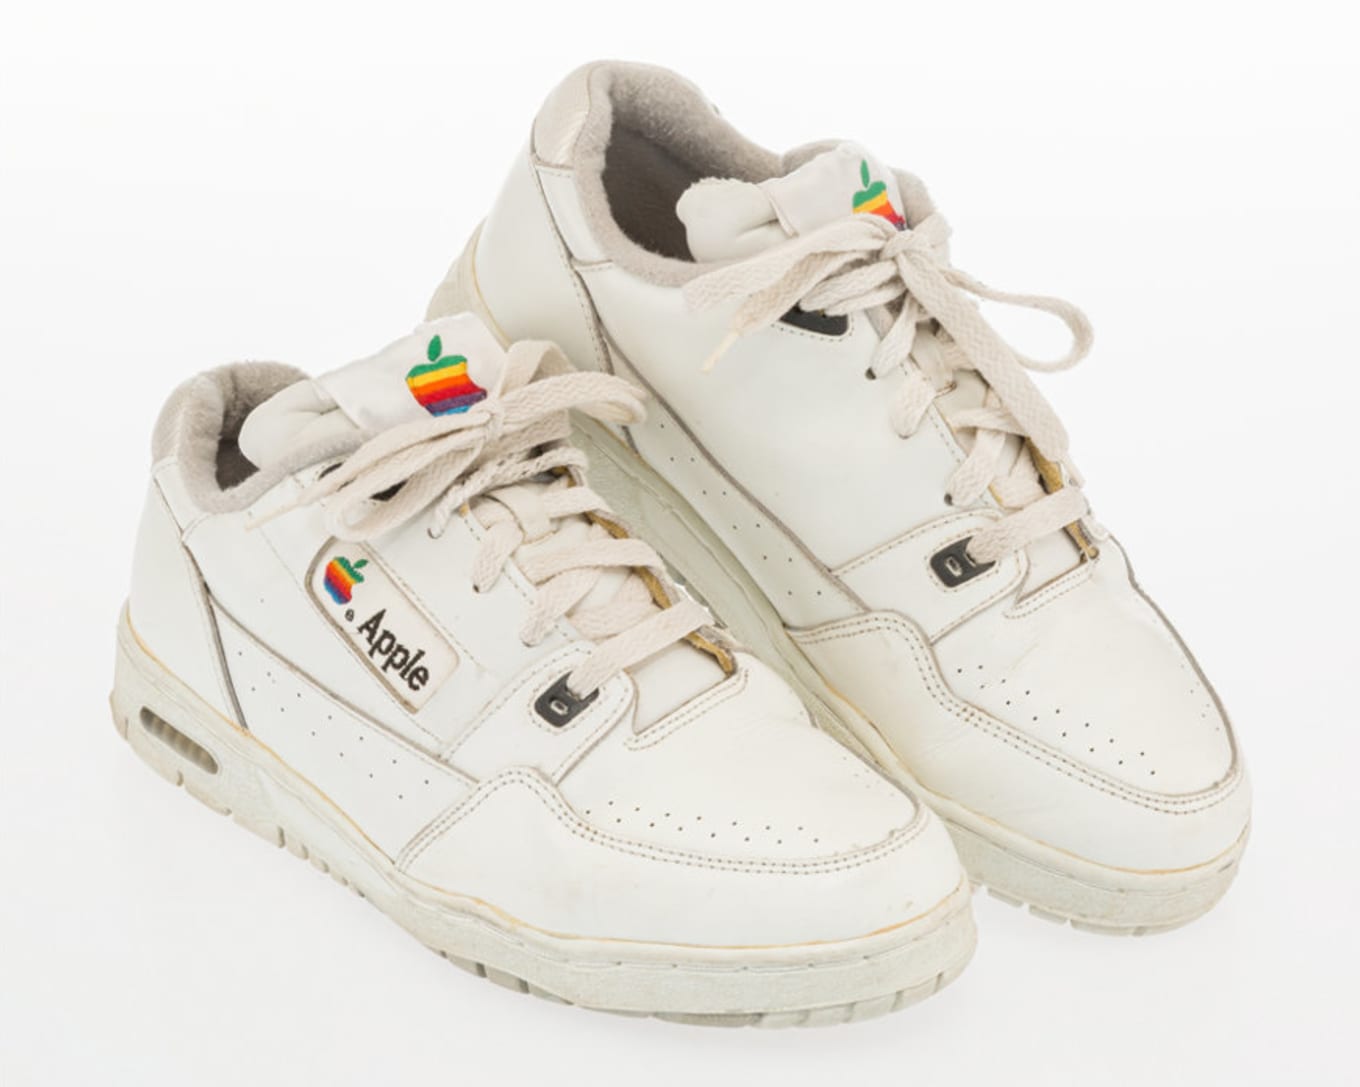 jaloezie Protestant Uitscheiden Rare Apple Sneakers Just Sold for Nearly $10,000 | Sole Collector